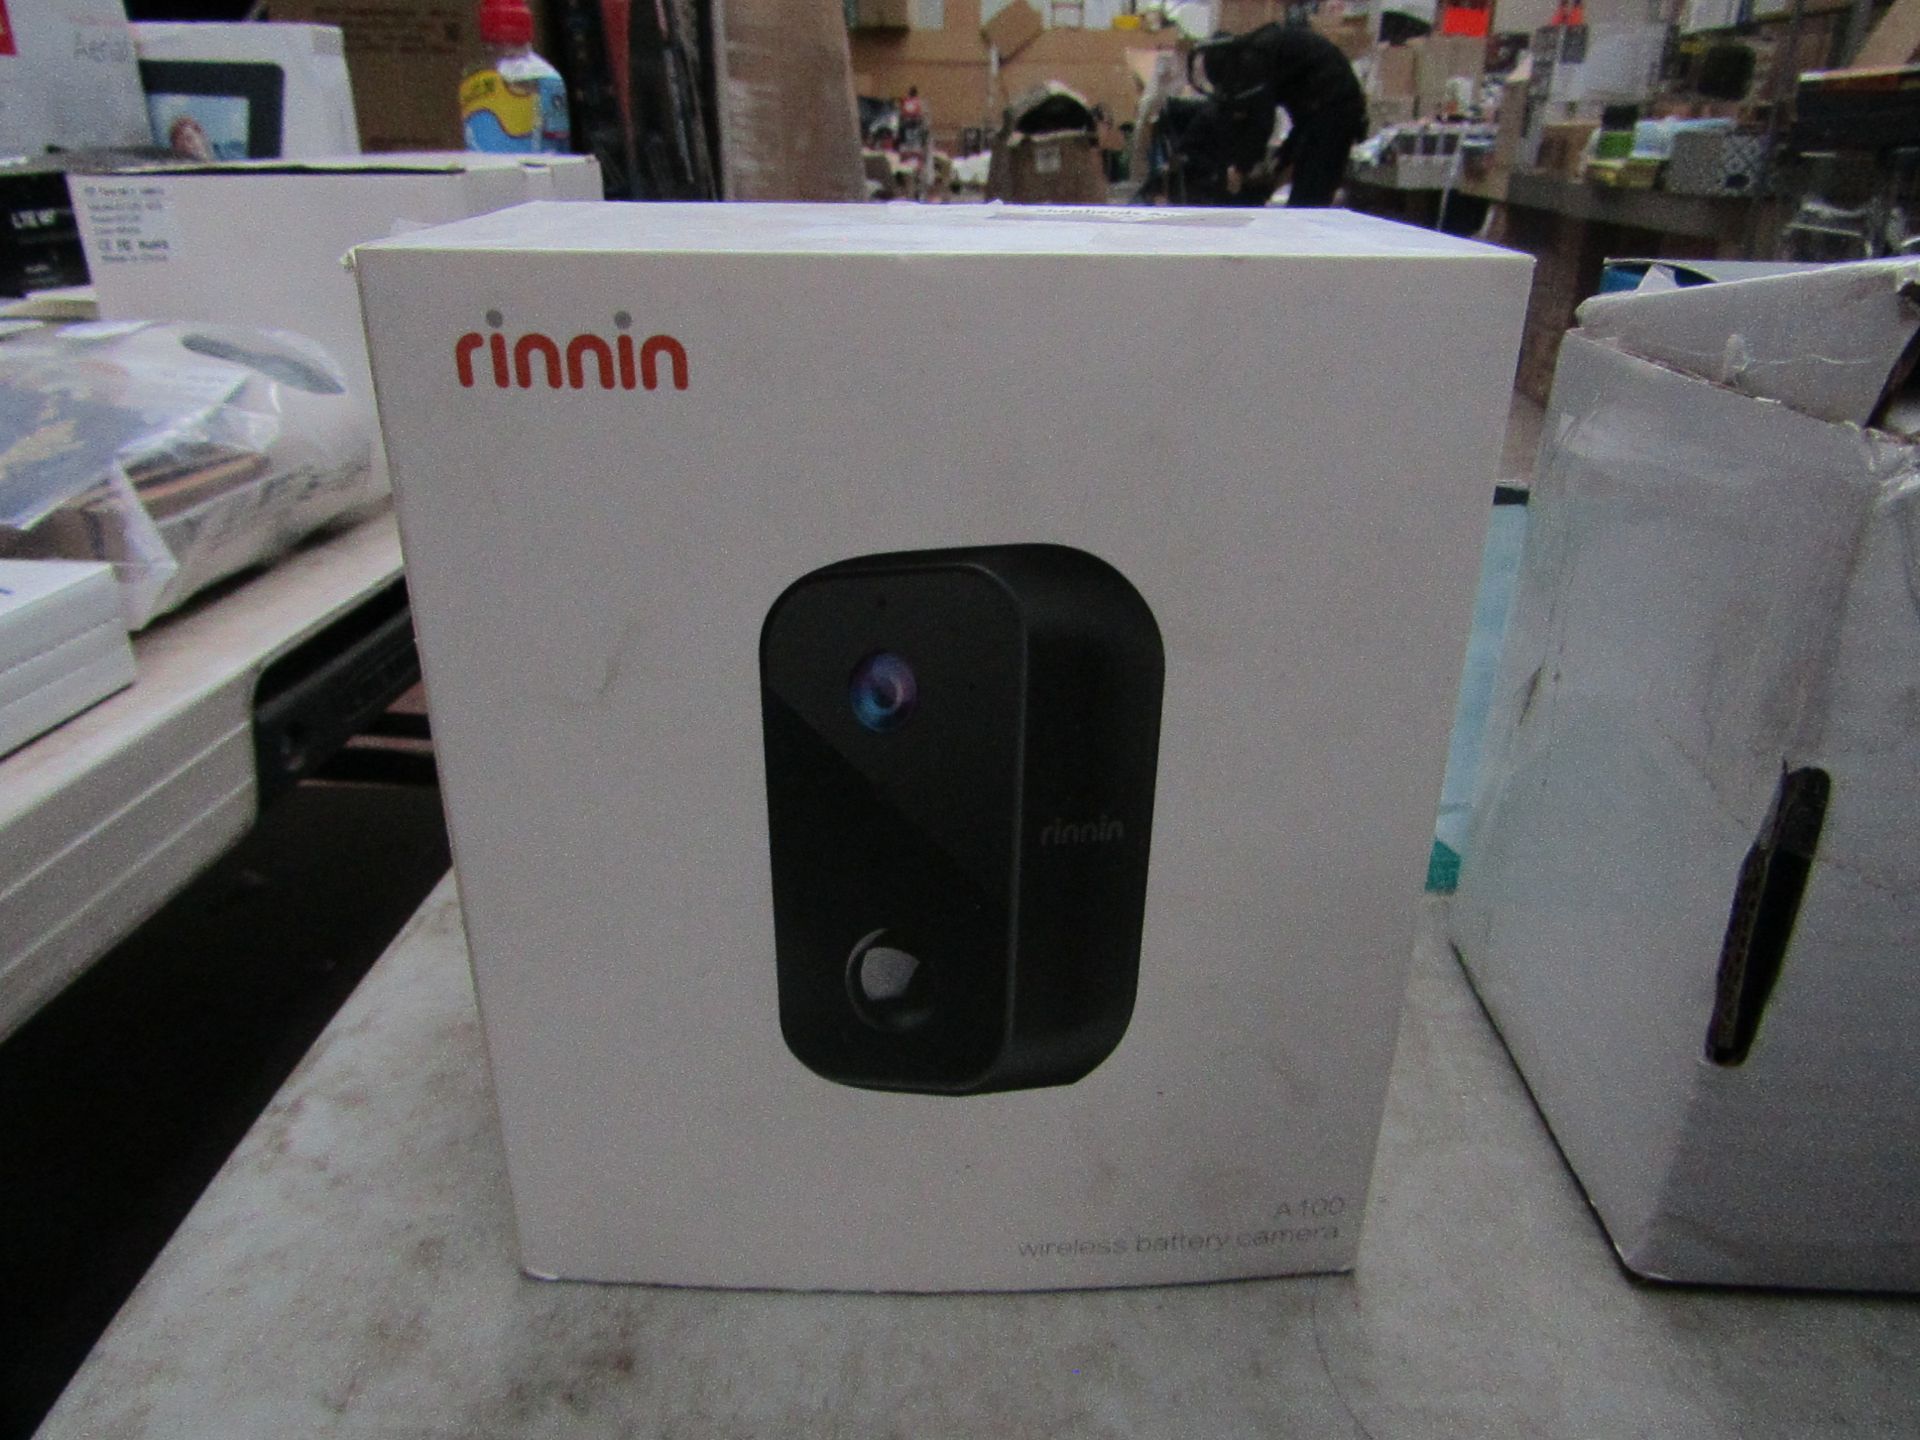 Rinnin Wifi Battery CCTV Camera - Untested & Boxed - RRP £80